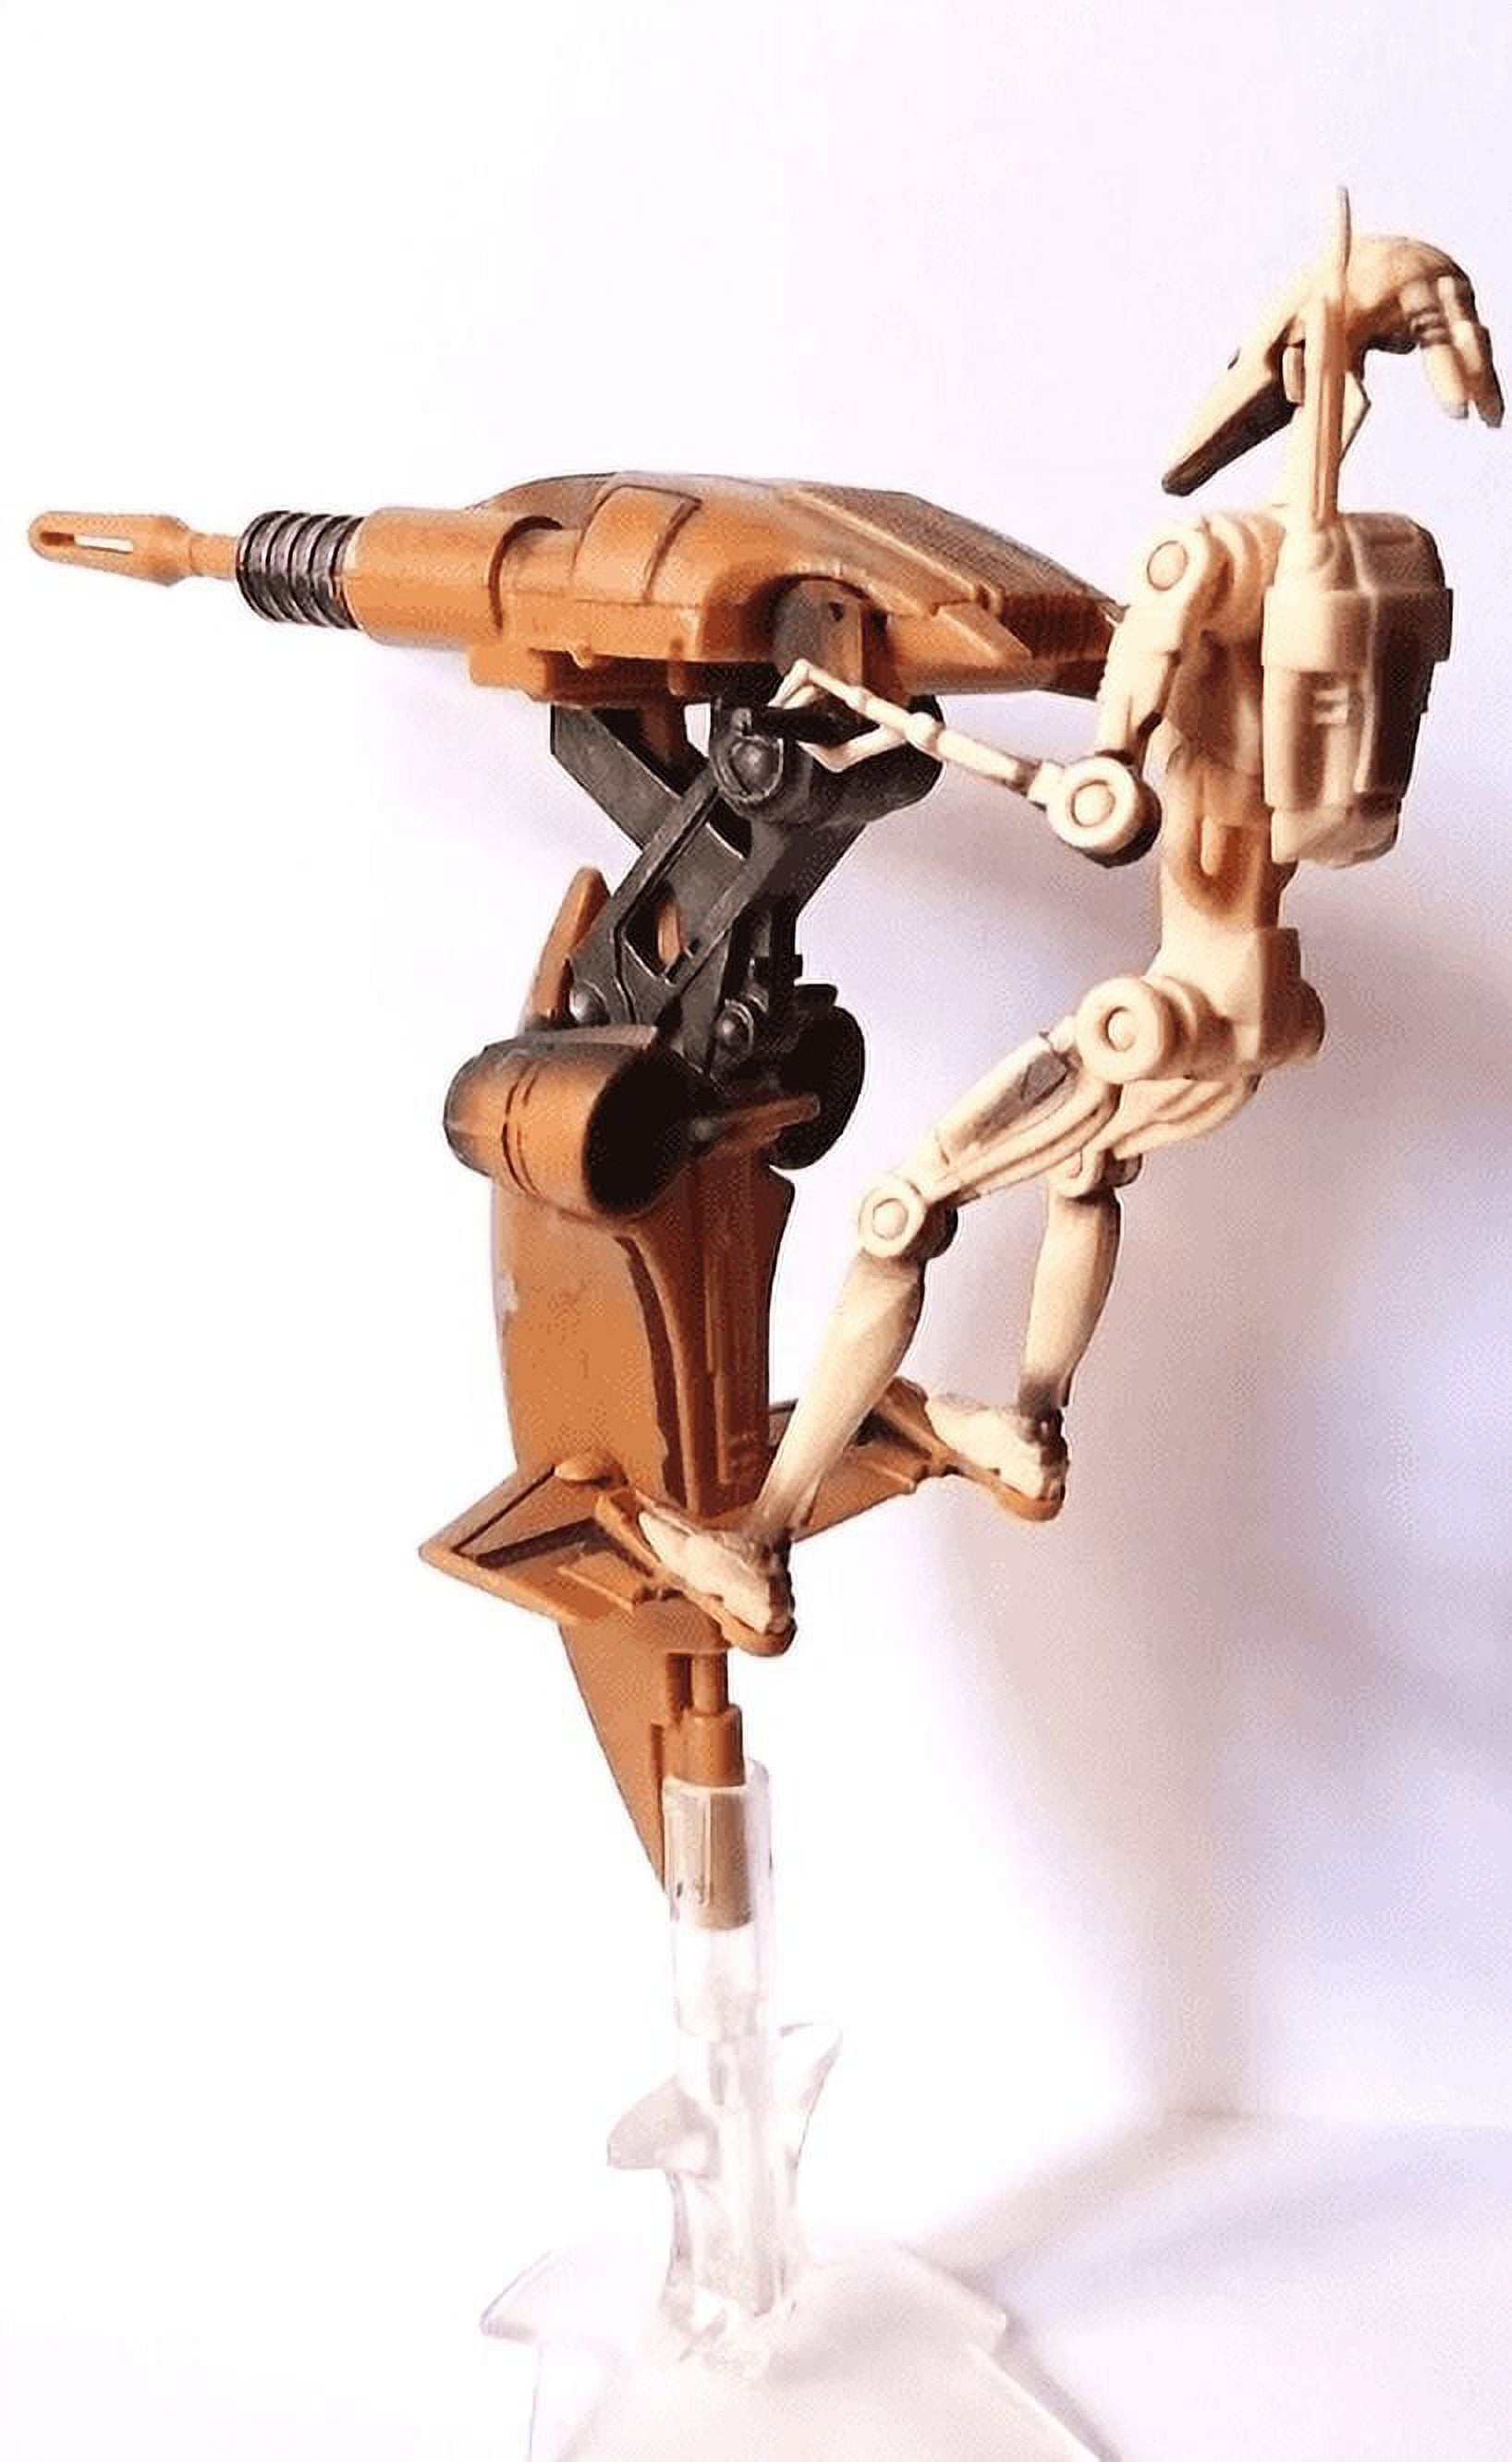 Review and photos of Star Wars S.T.A.P., Battle Droid action figure by  Sideshow